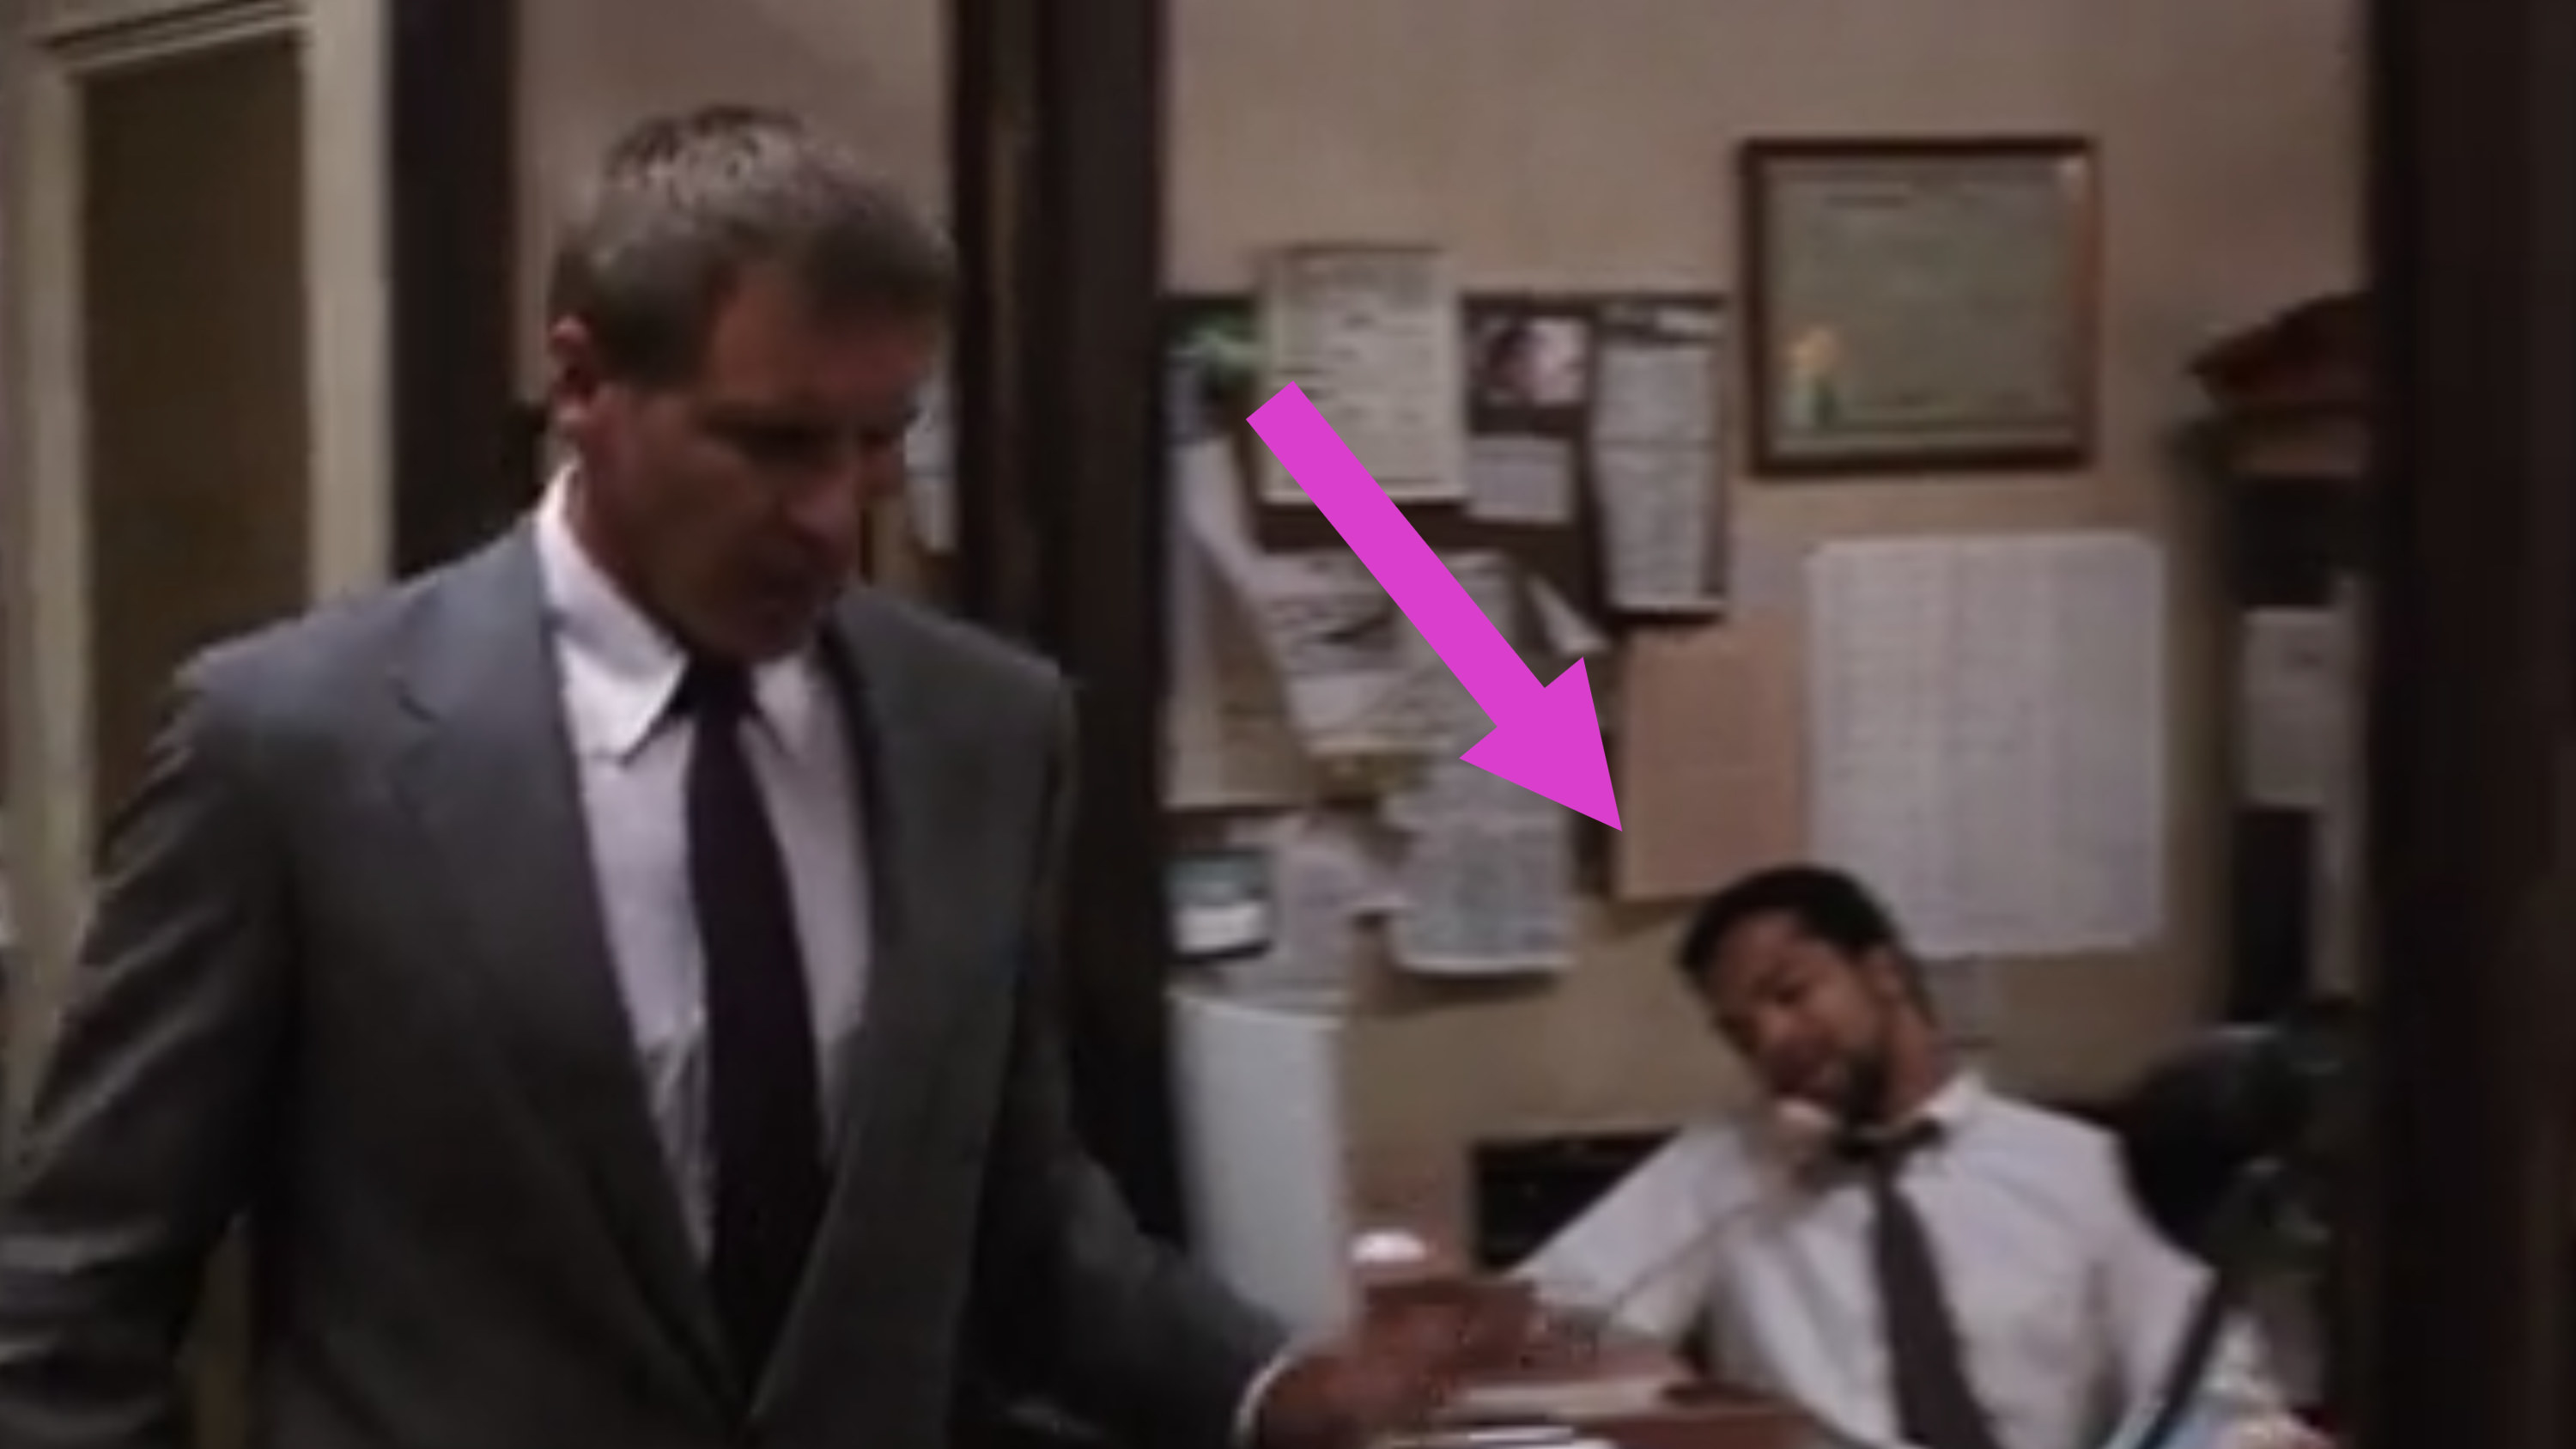 Jeffrey Wright as an attorney in the background sitting at his desk on the phone